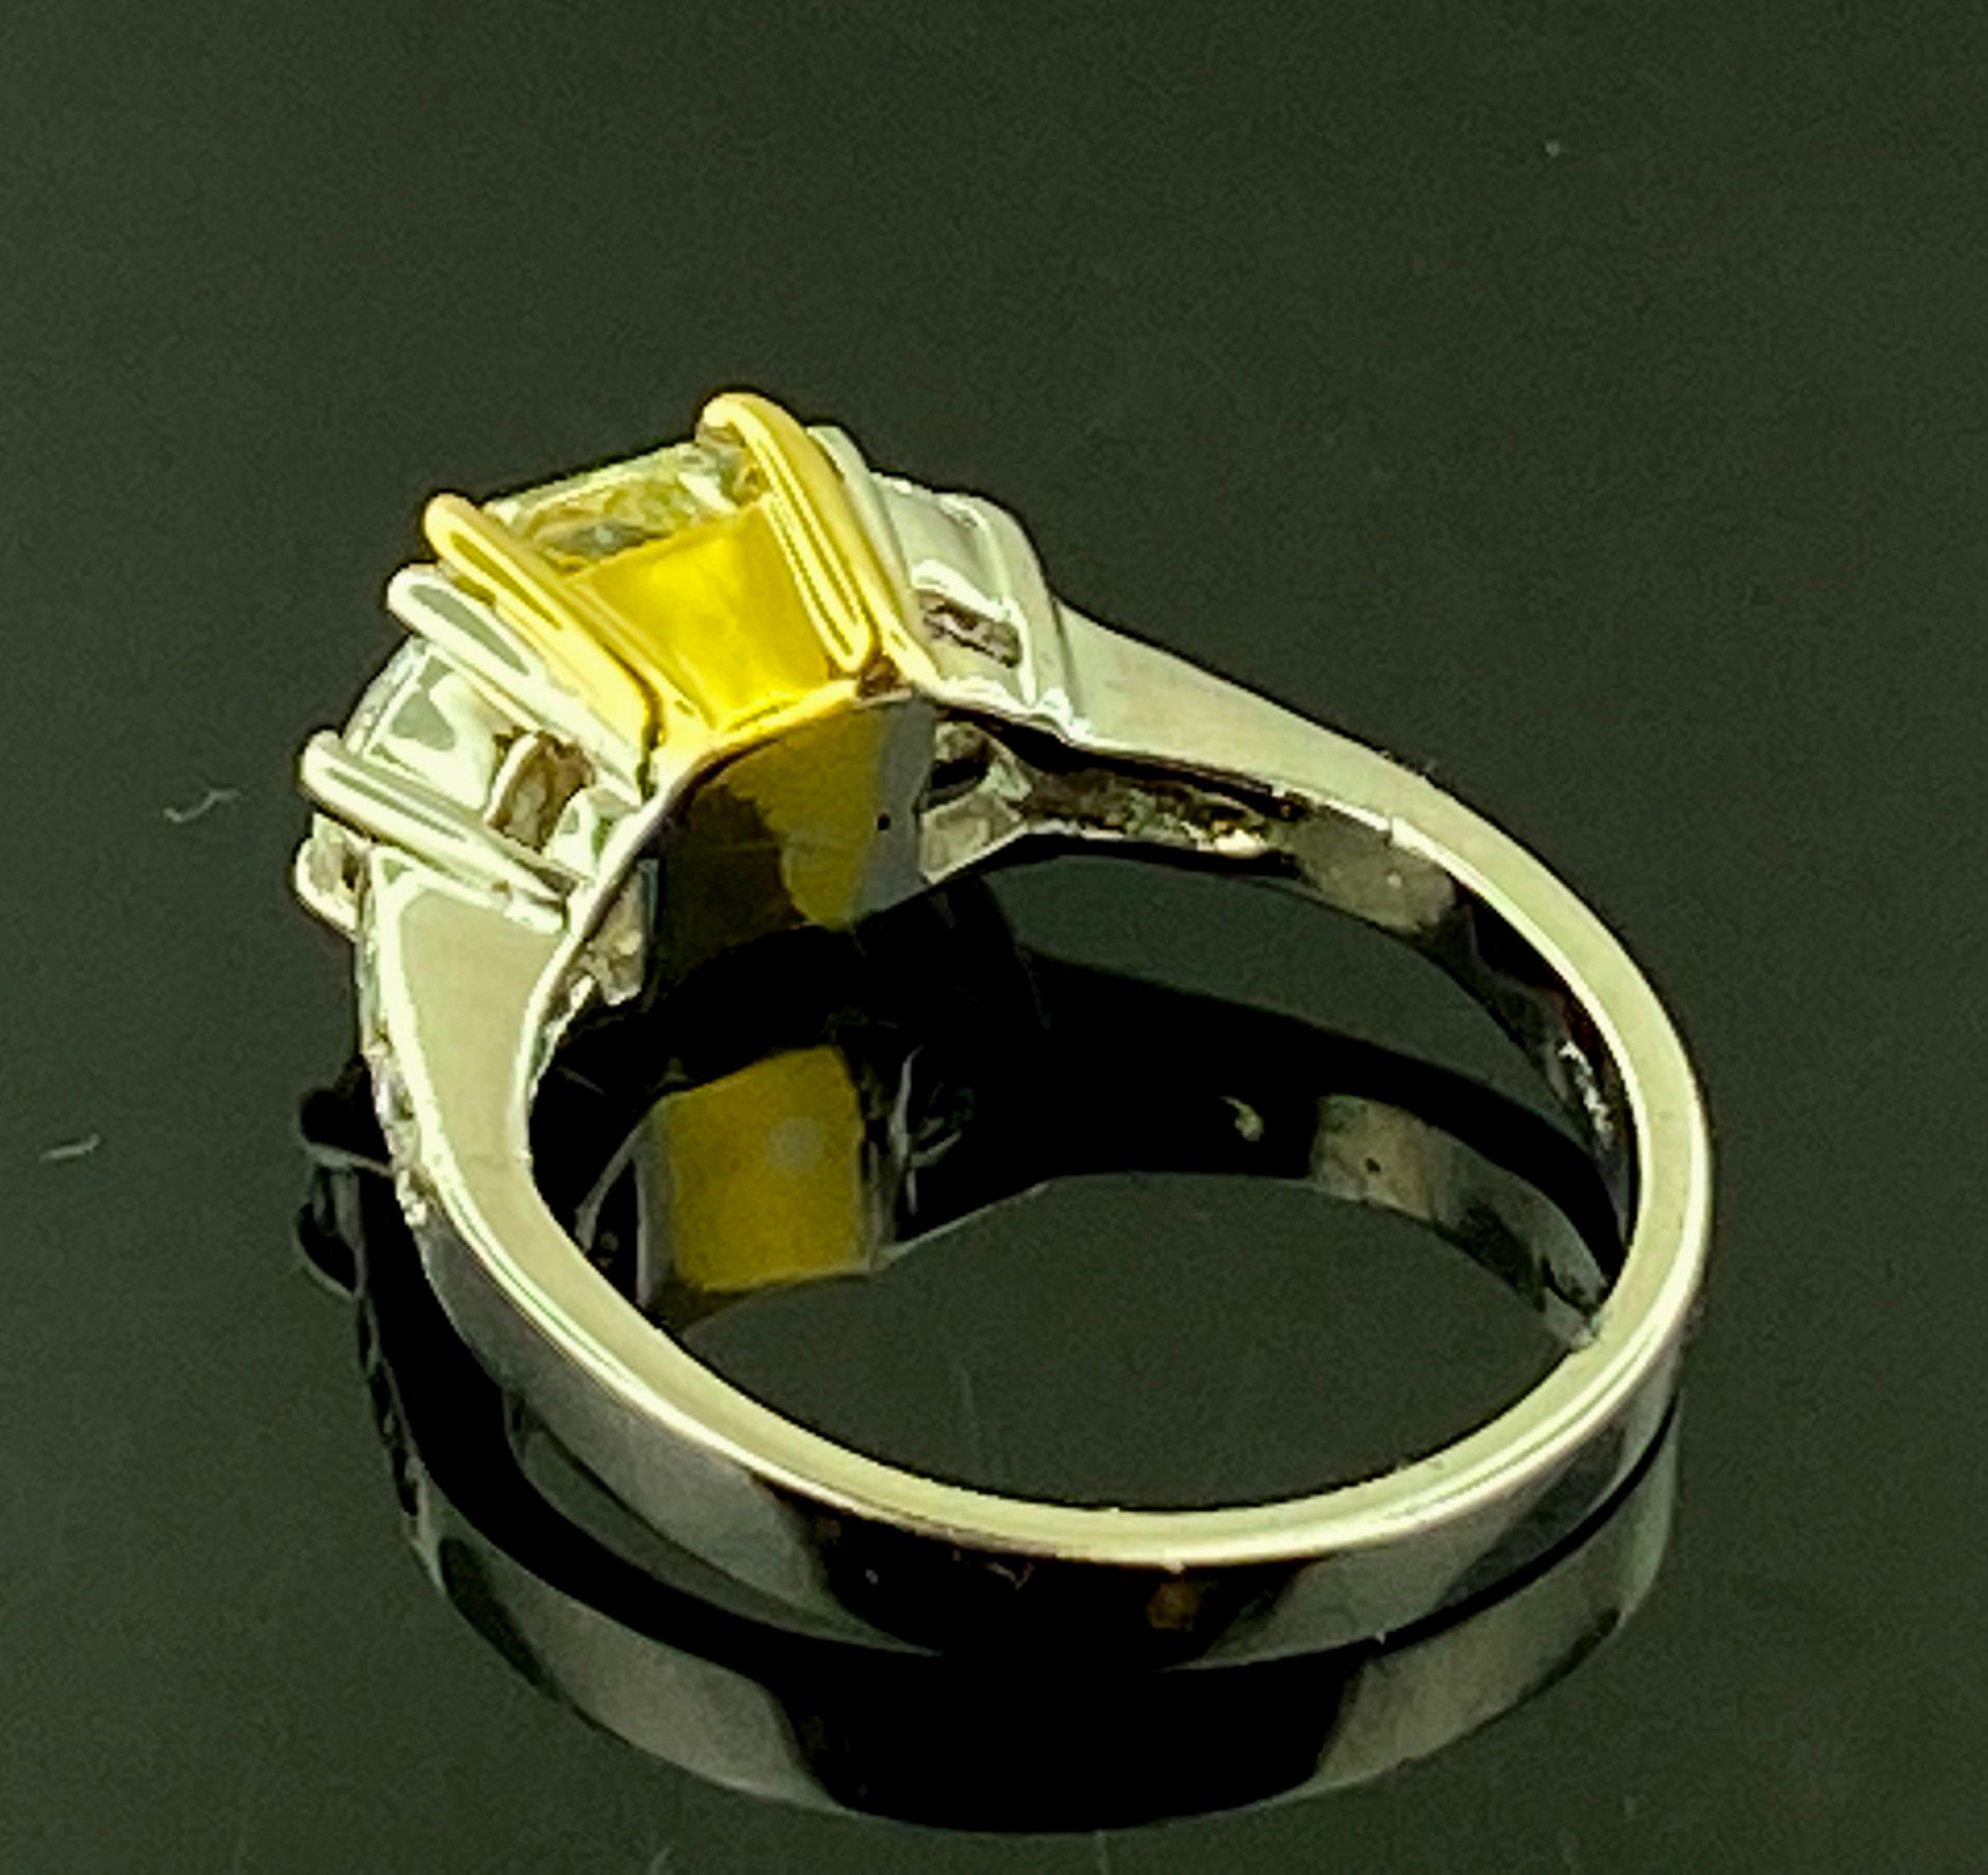 Women's or Men's 22 KT Yellow Gold & Platinum 1.82 Ct Fancy Yellow Radiant Cut Diamond Ring For Sale